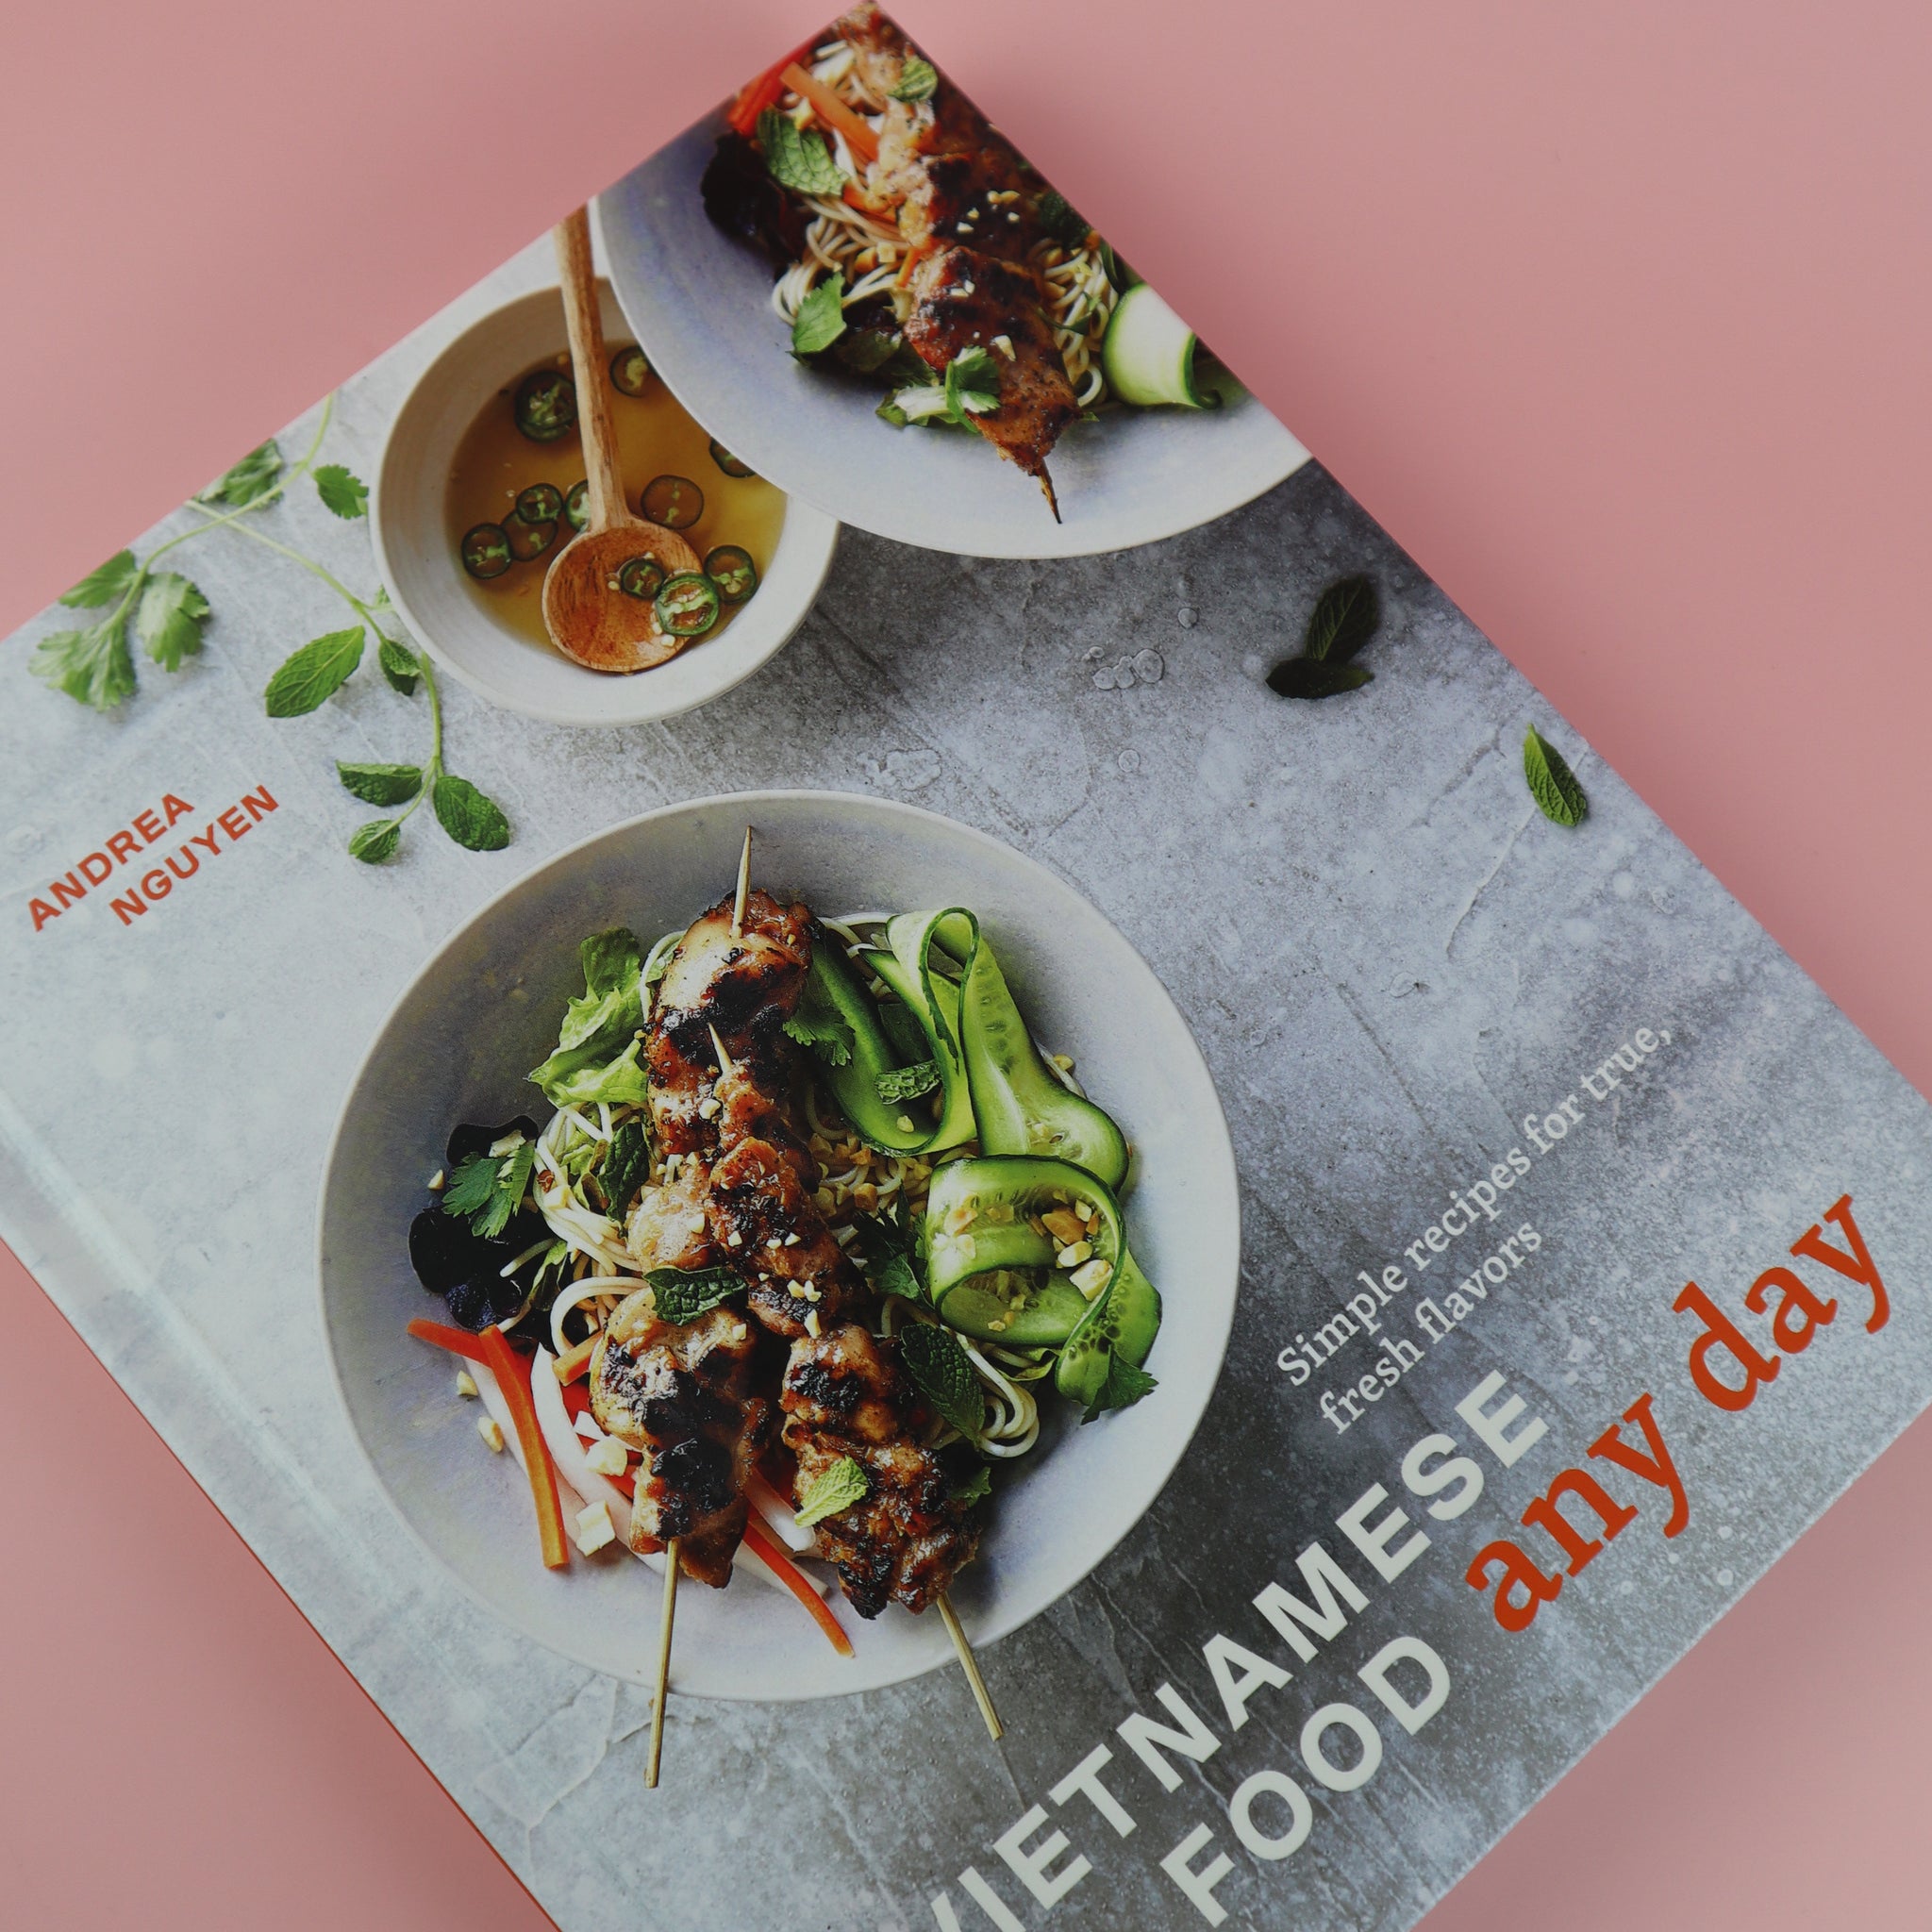 ANDREA NGUYEN VIETNAMESE FOOD ANY DAY COOKBOOK